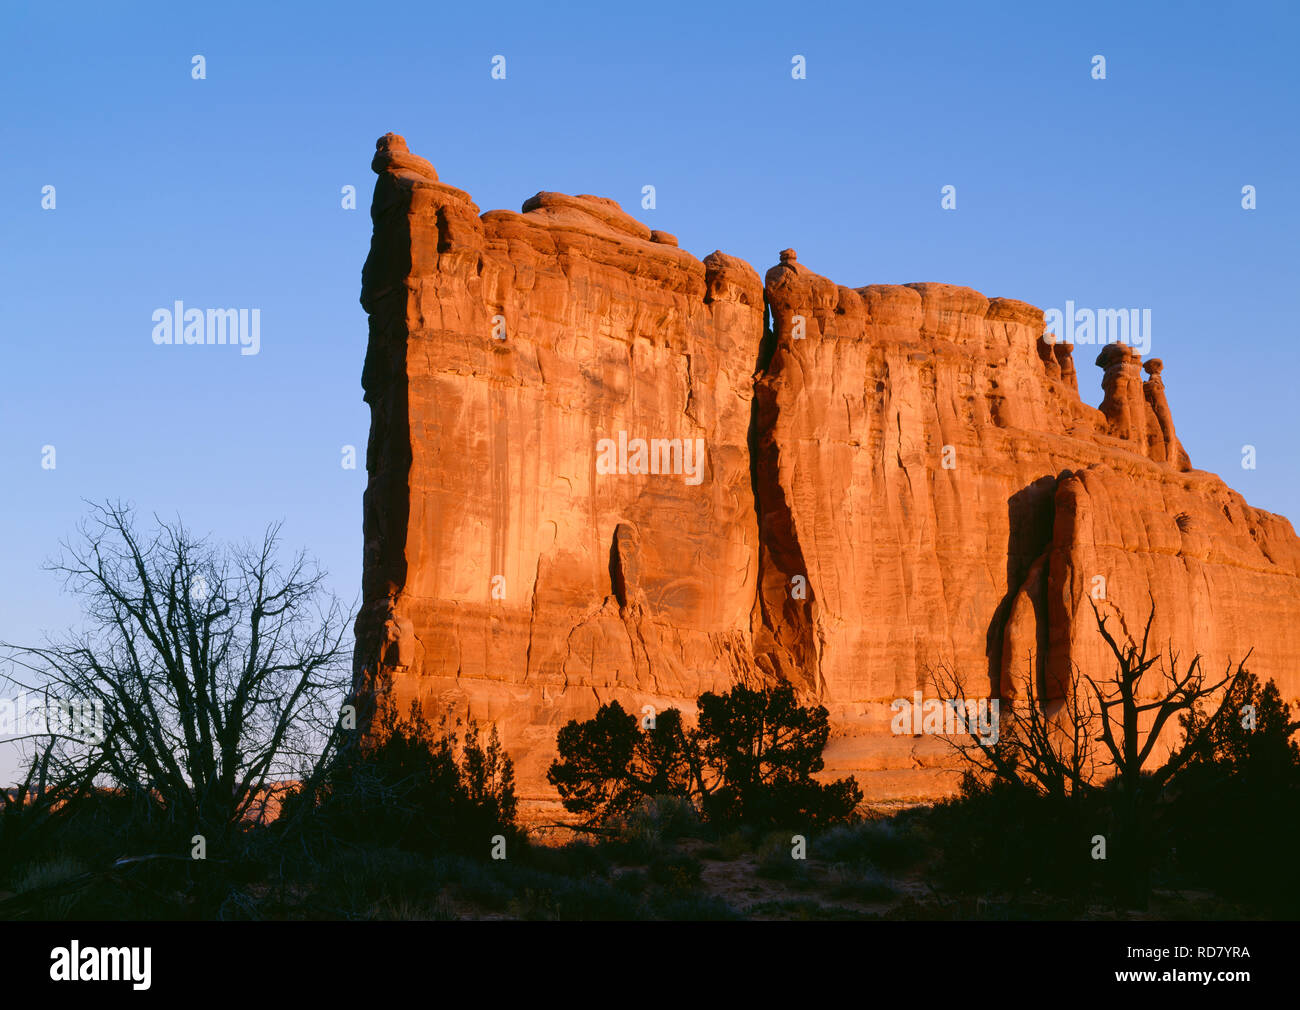 USA, Utah, Arches National Park, Sunrise light on the Tower of Babel which is composed of Entrada Sandstone. Stock Photo